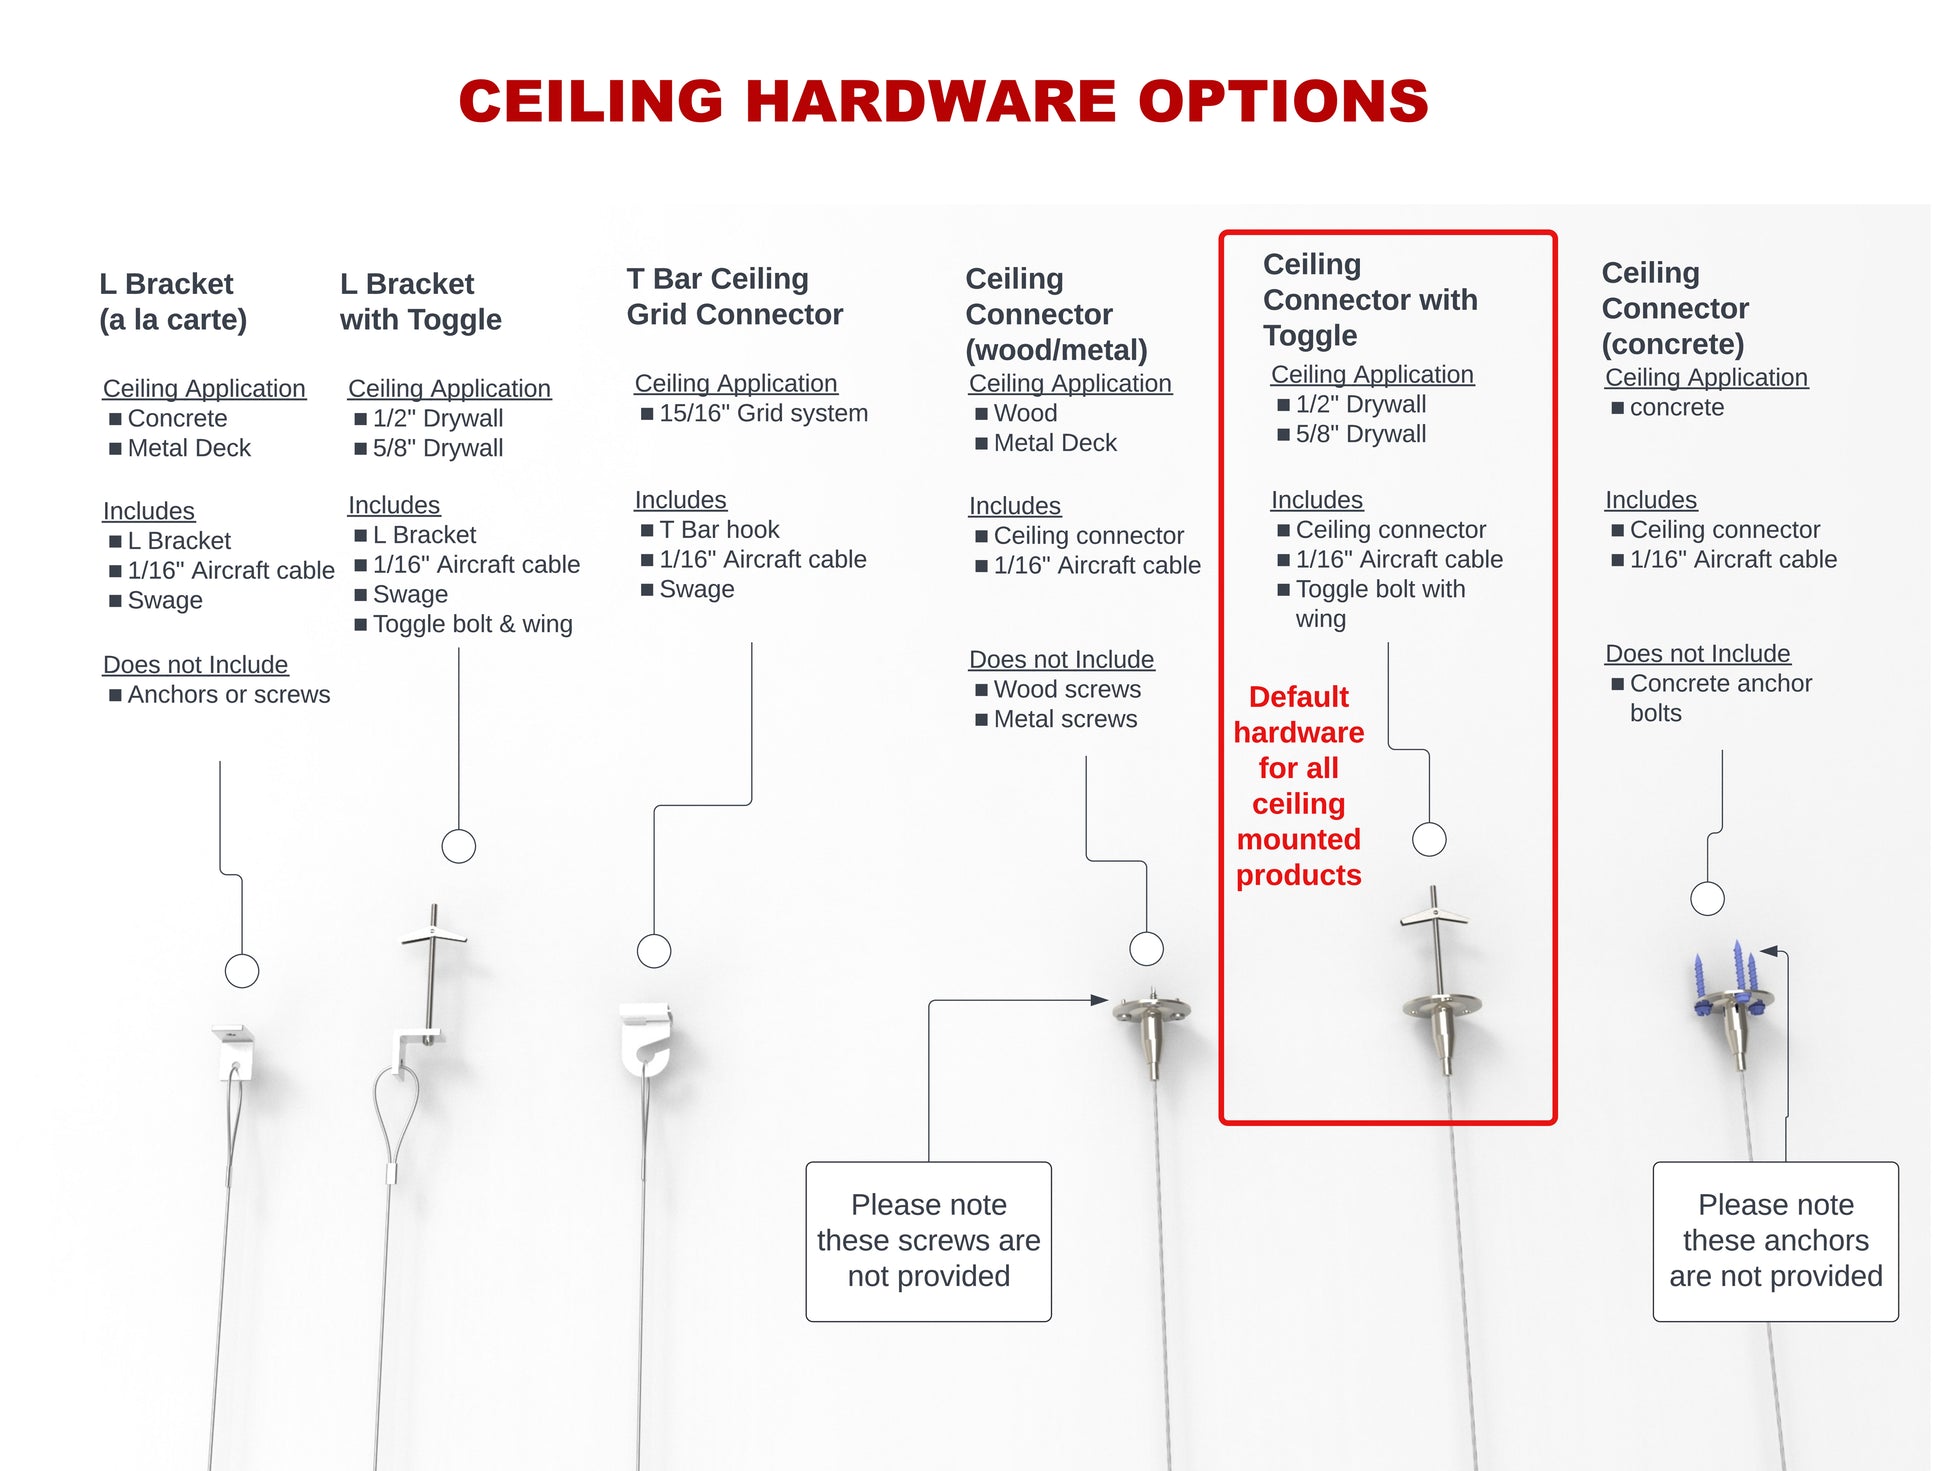 acoustic-Ceiling-hardware-options